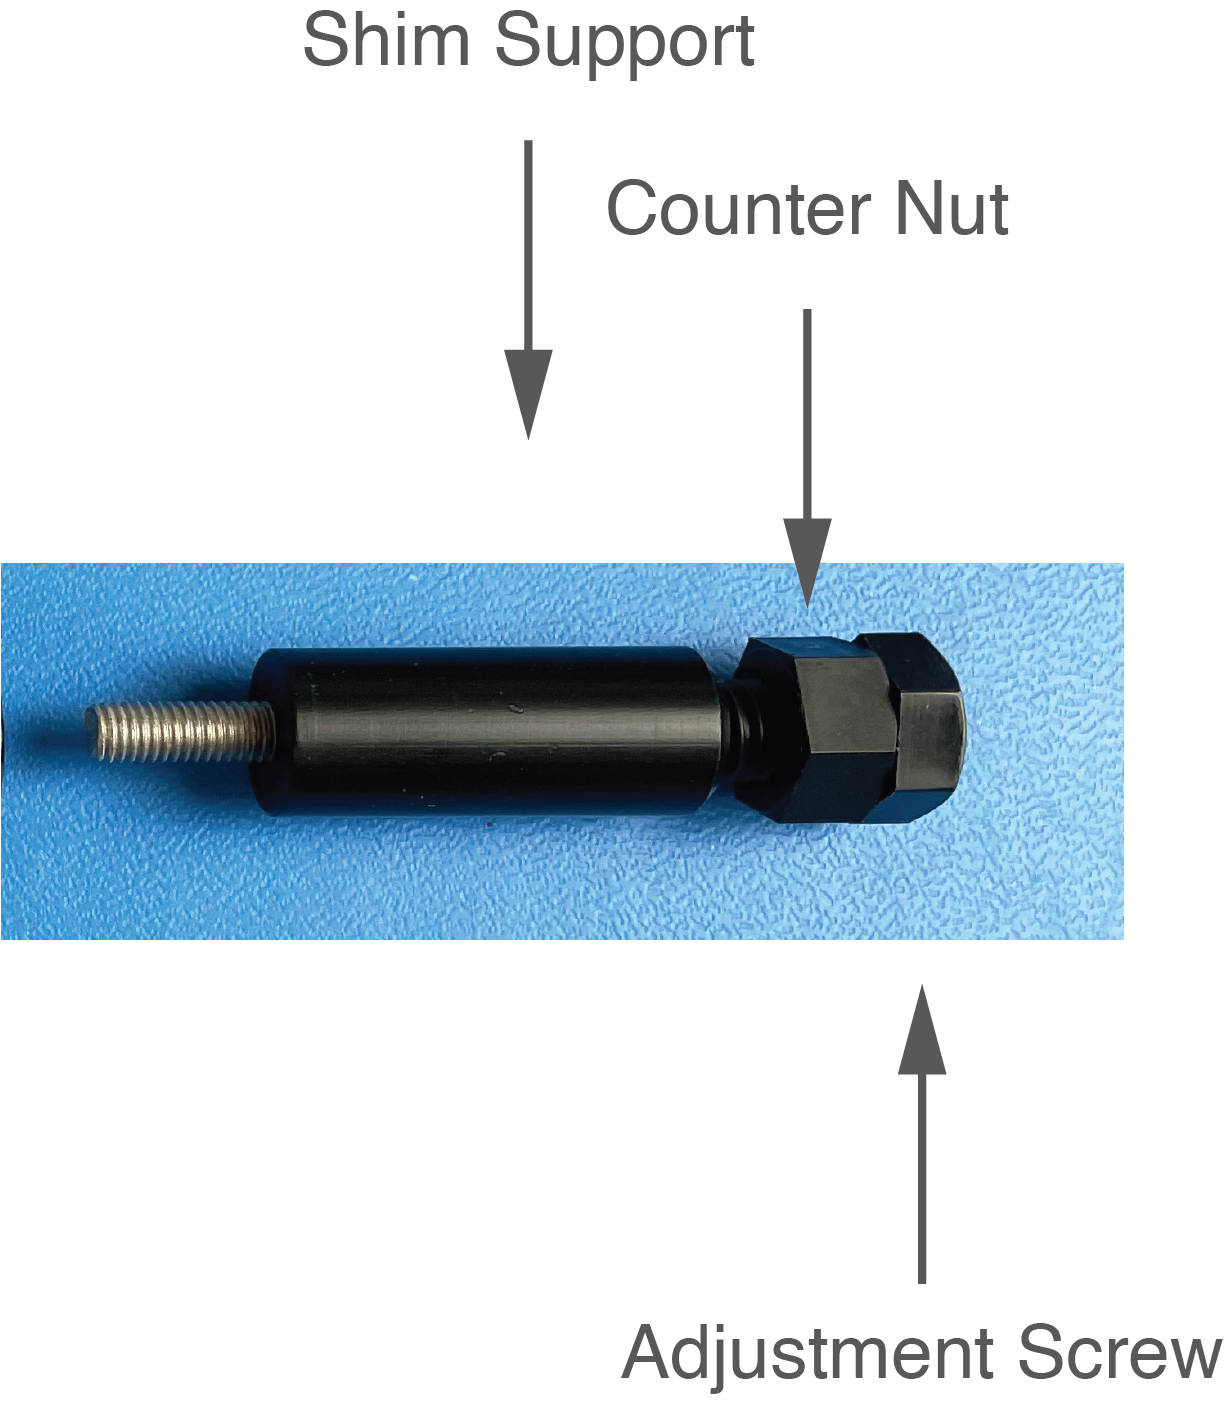 Shim Supports with adjustment screw and counter nut